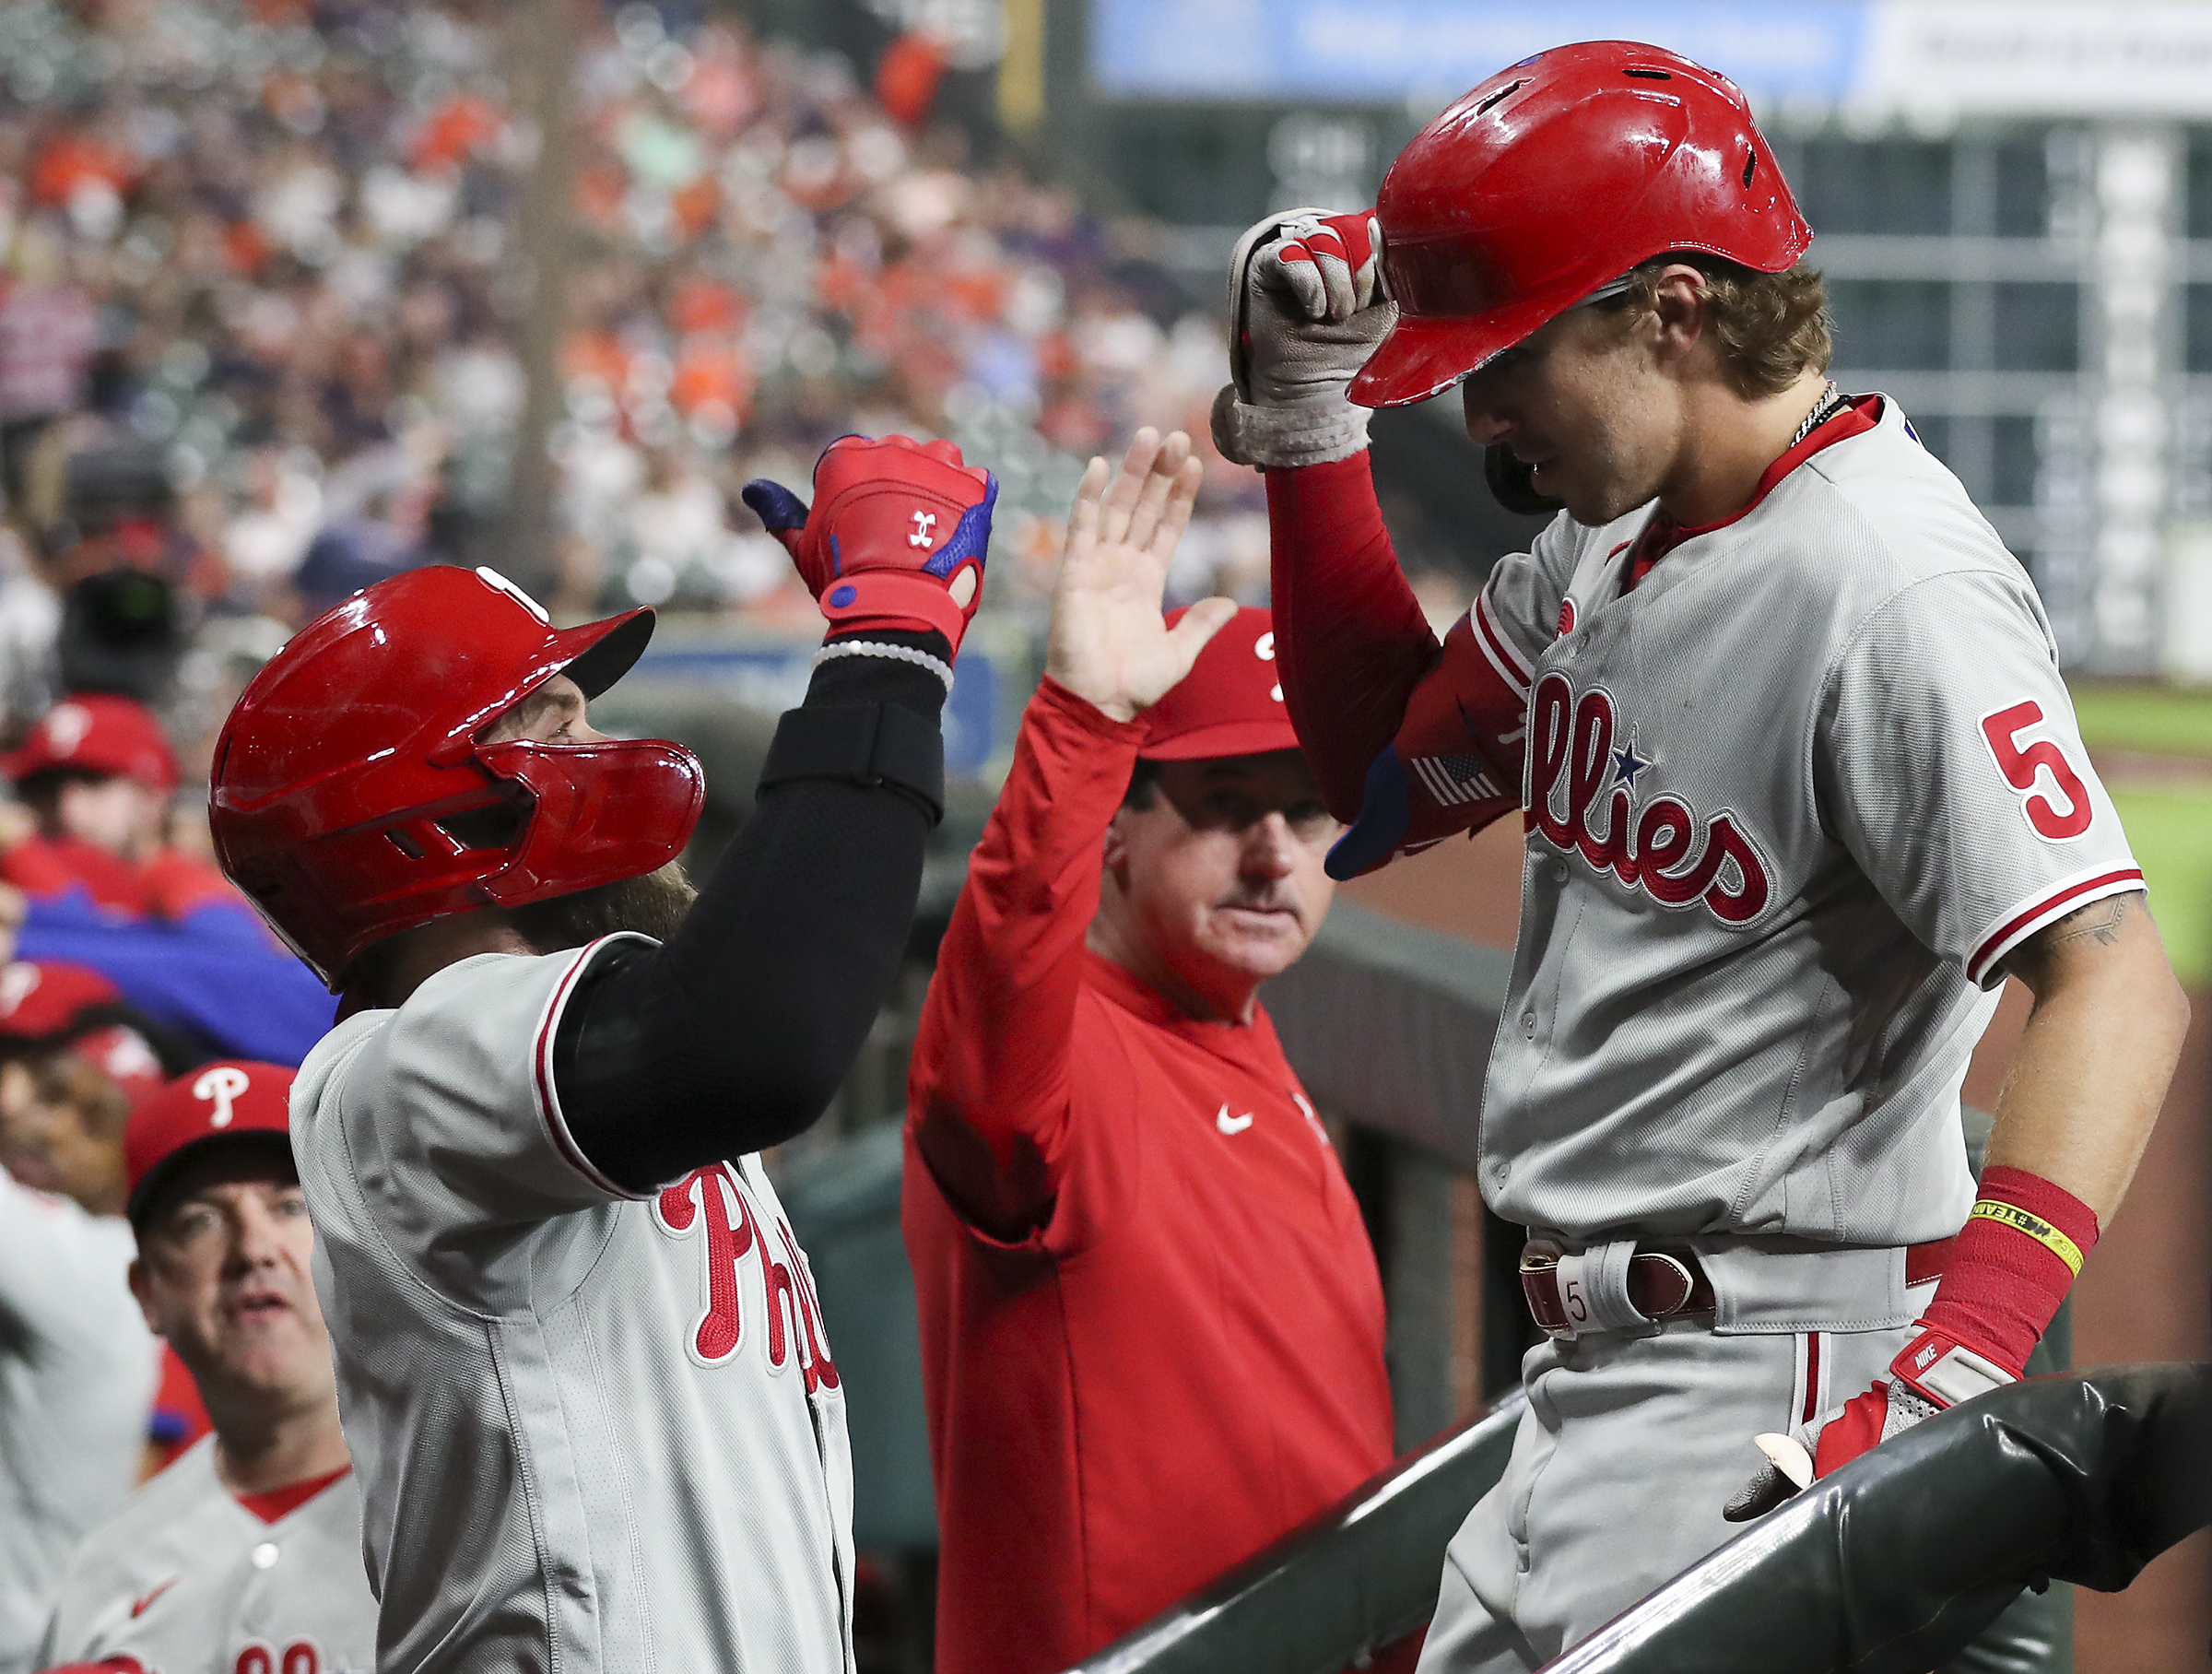 Phillies clinch first postseason appearance since 2011: 'We're